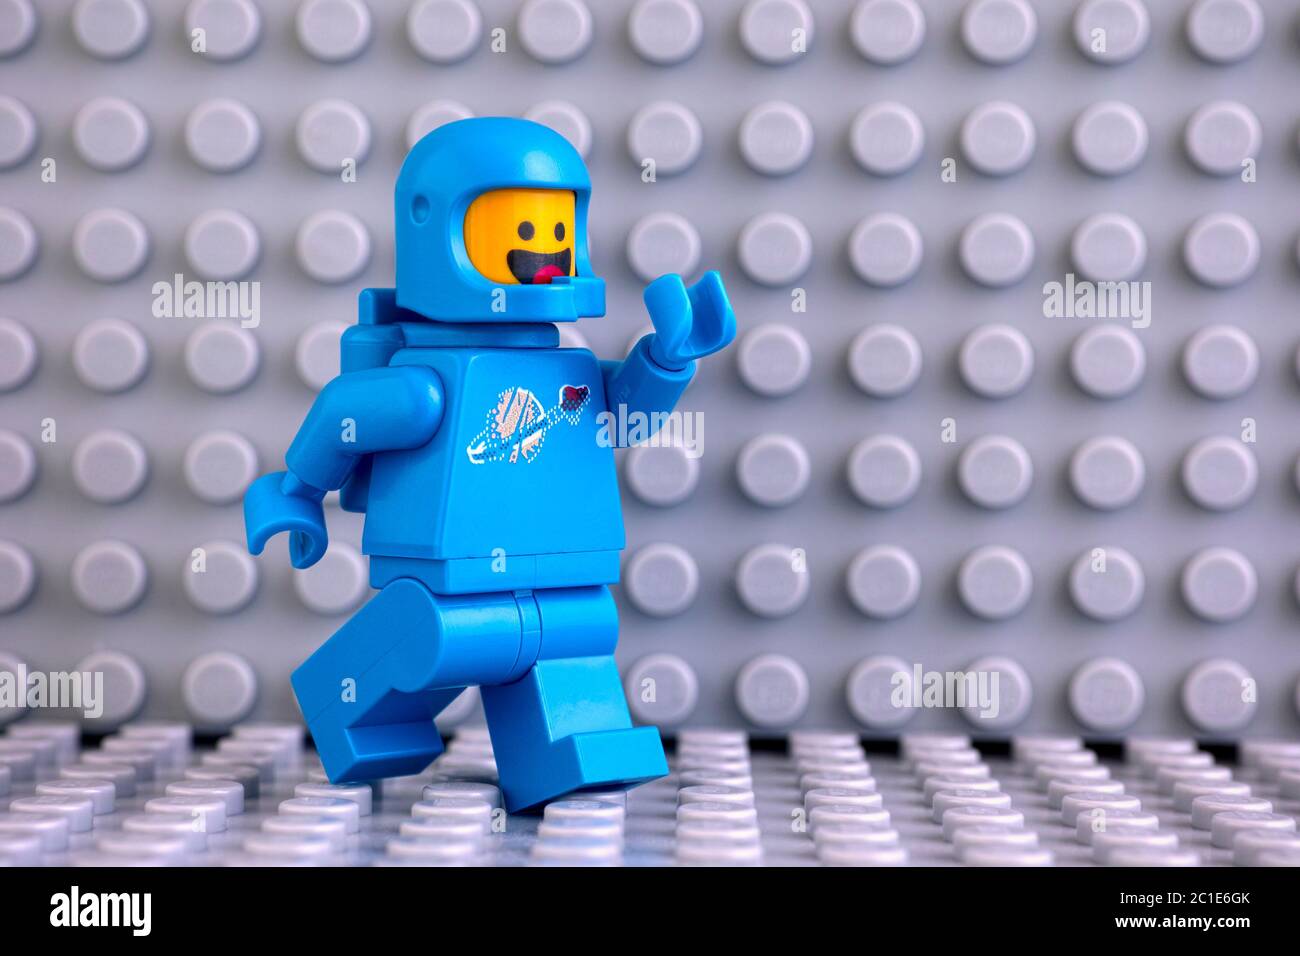 Tambov, Russian Federation - June 04, 2020 Lego astronaut minifigures going  on gray baseplate background Stock Photo - Alamy